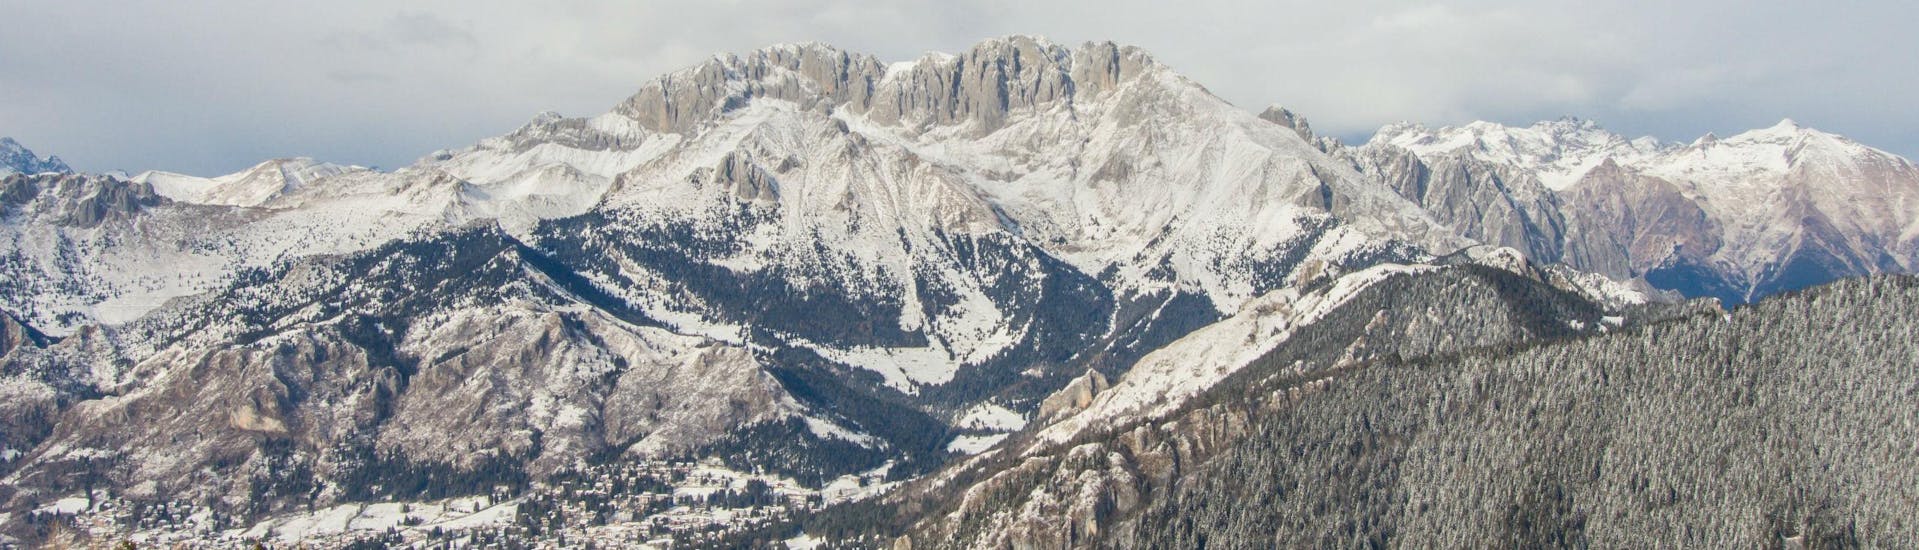 A view of the snow-capped mountains of Monte Pora in Italy, where local ski schools offer several types of ski lessons.